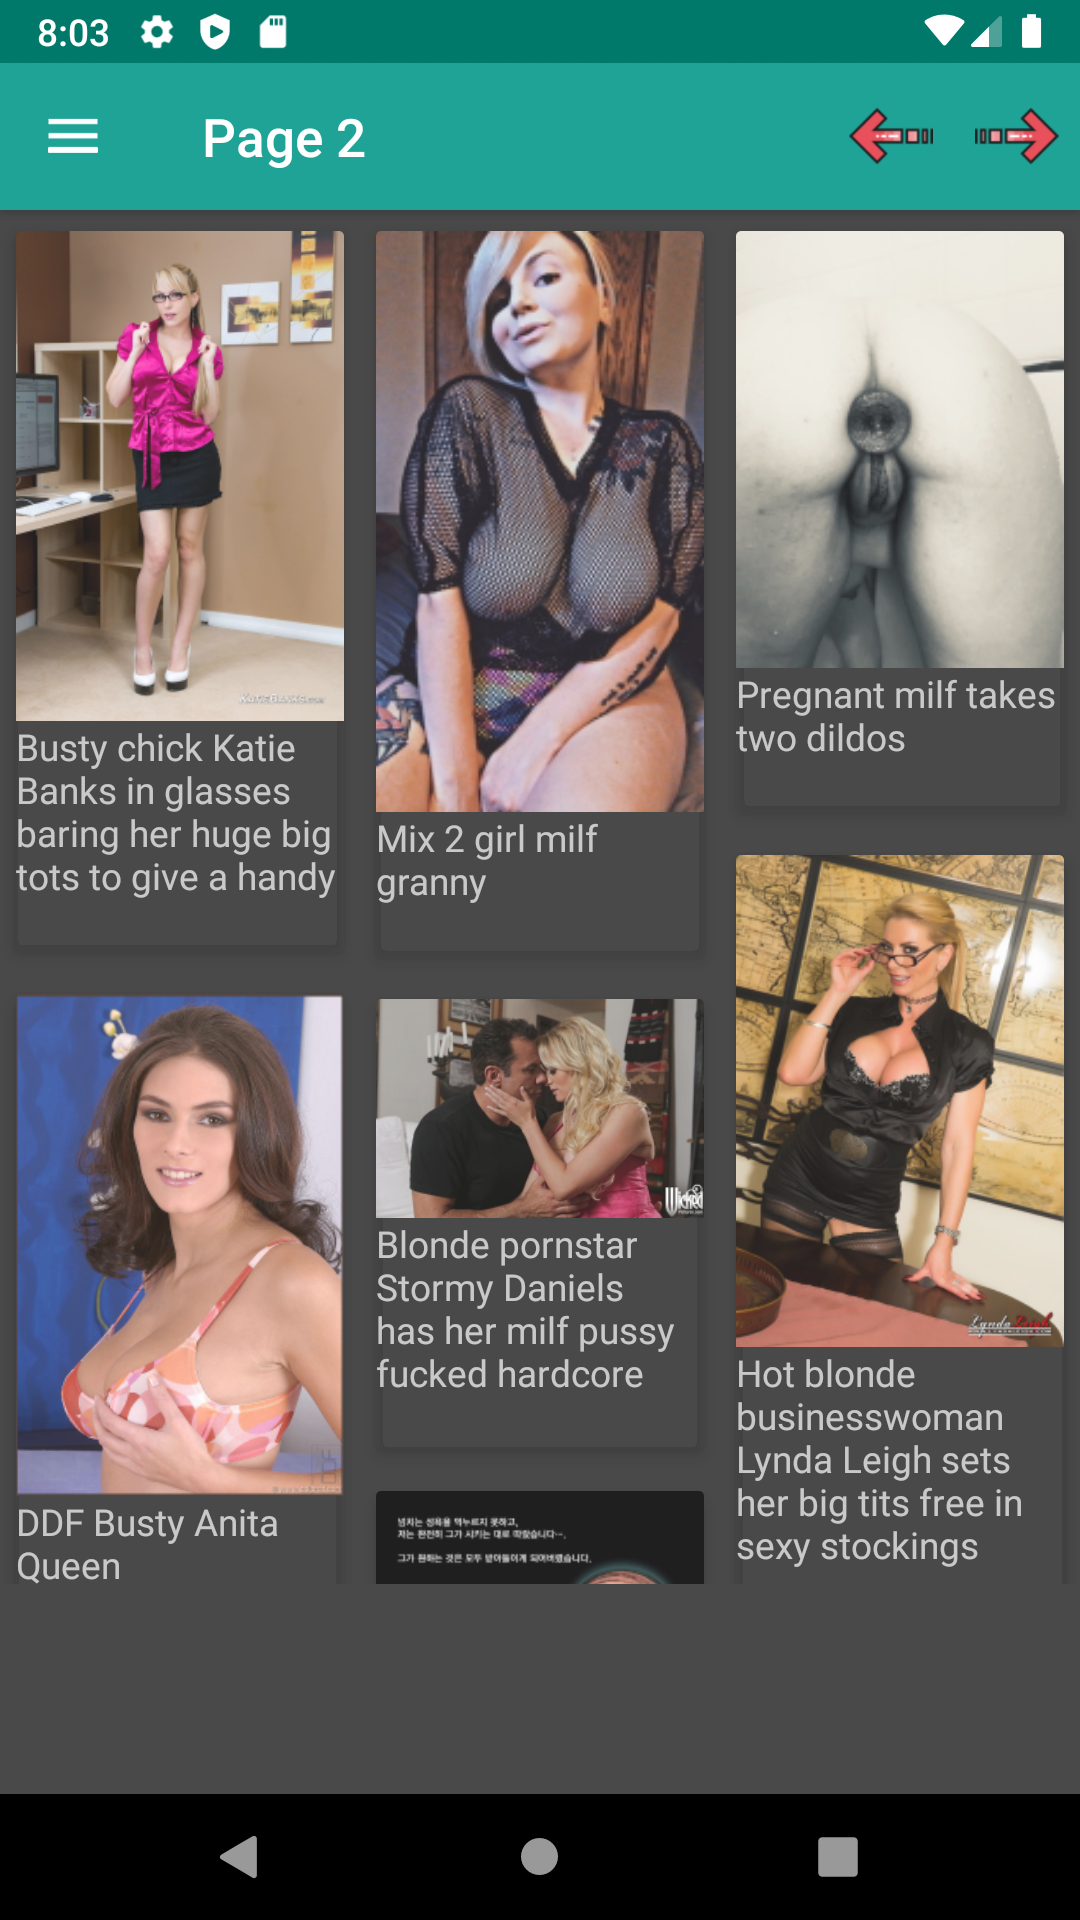 Milf Porn apps,for,hentie,download,hot,watching,excuses,henati,galleries,pornstars,app,image,pcs,sexy,hentai,rated,henti,pic,porn,apk,pics